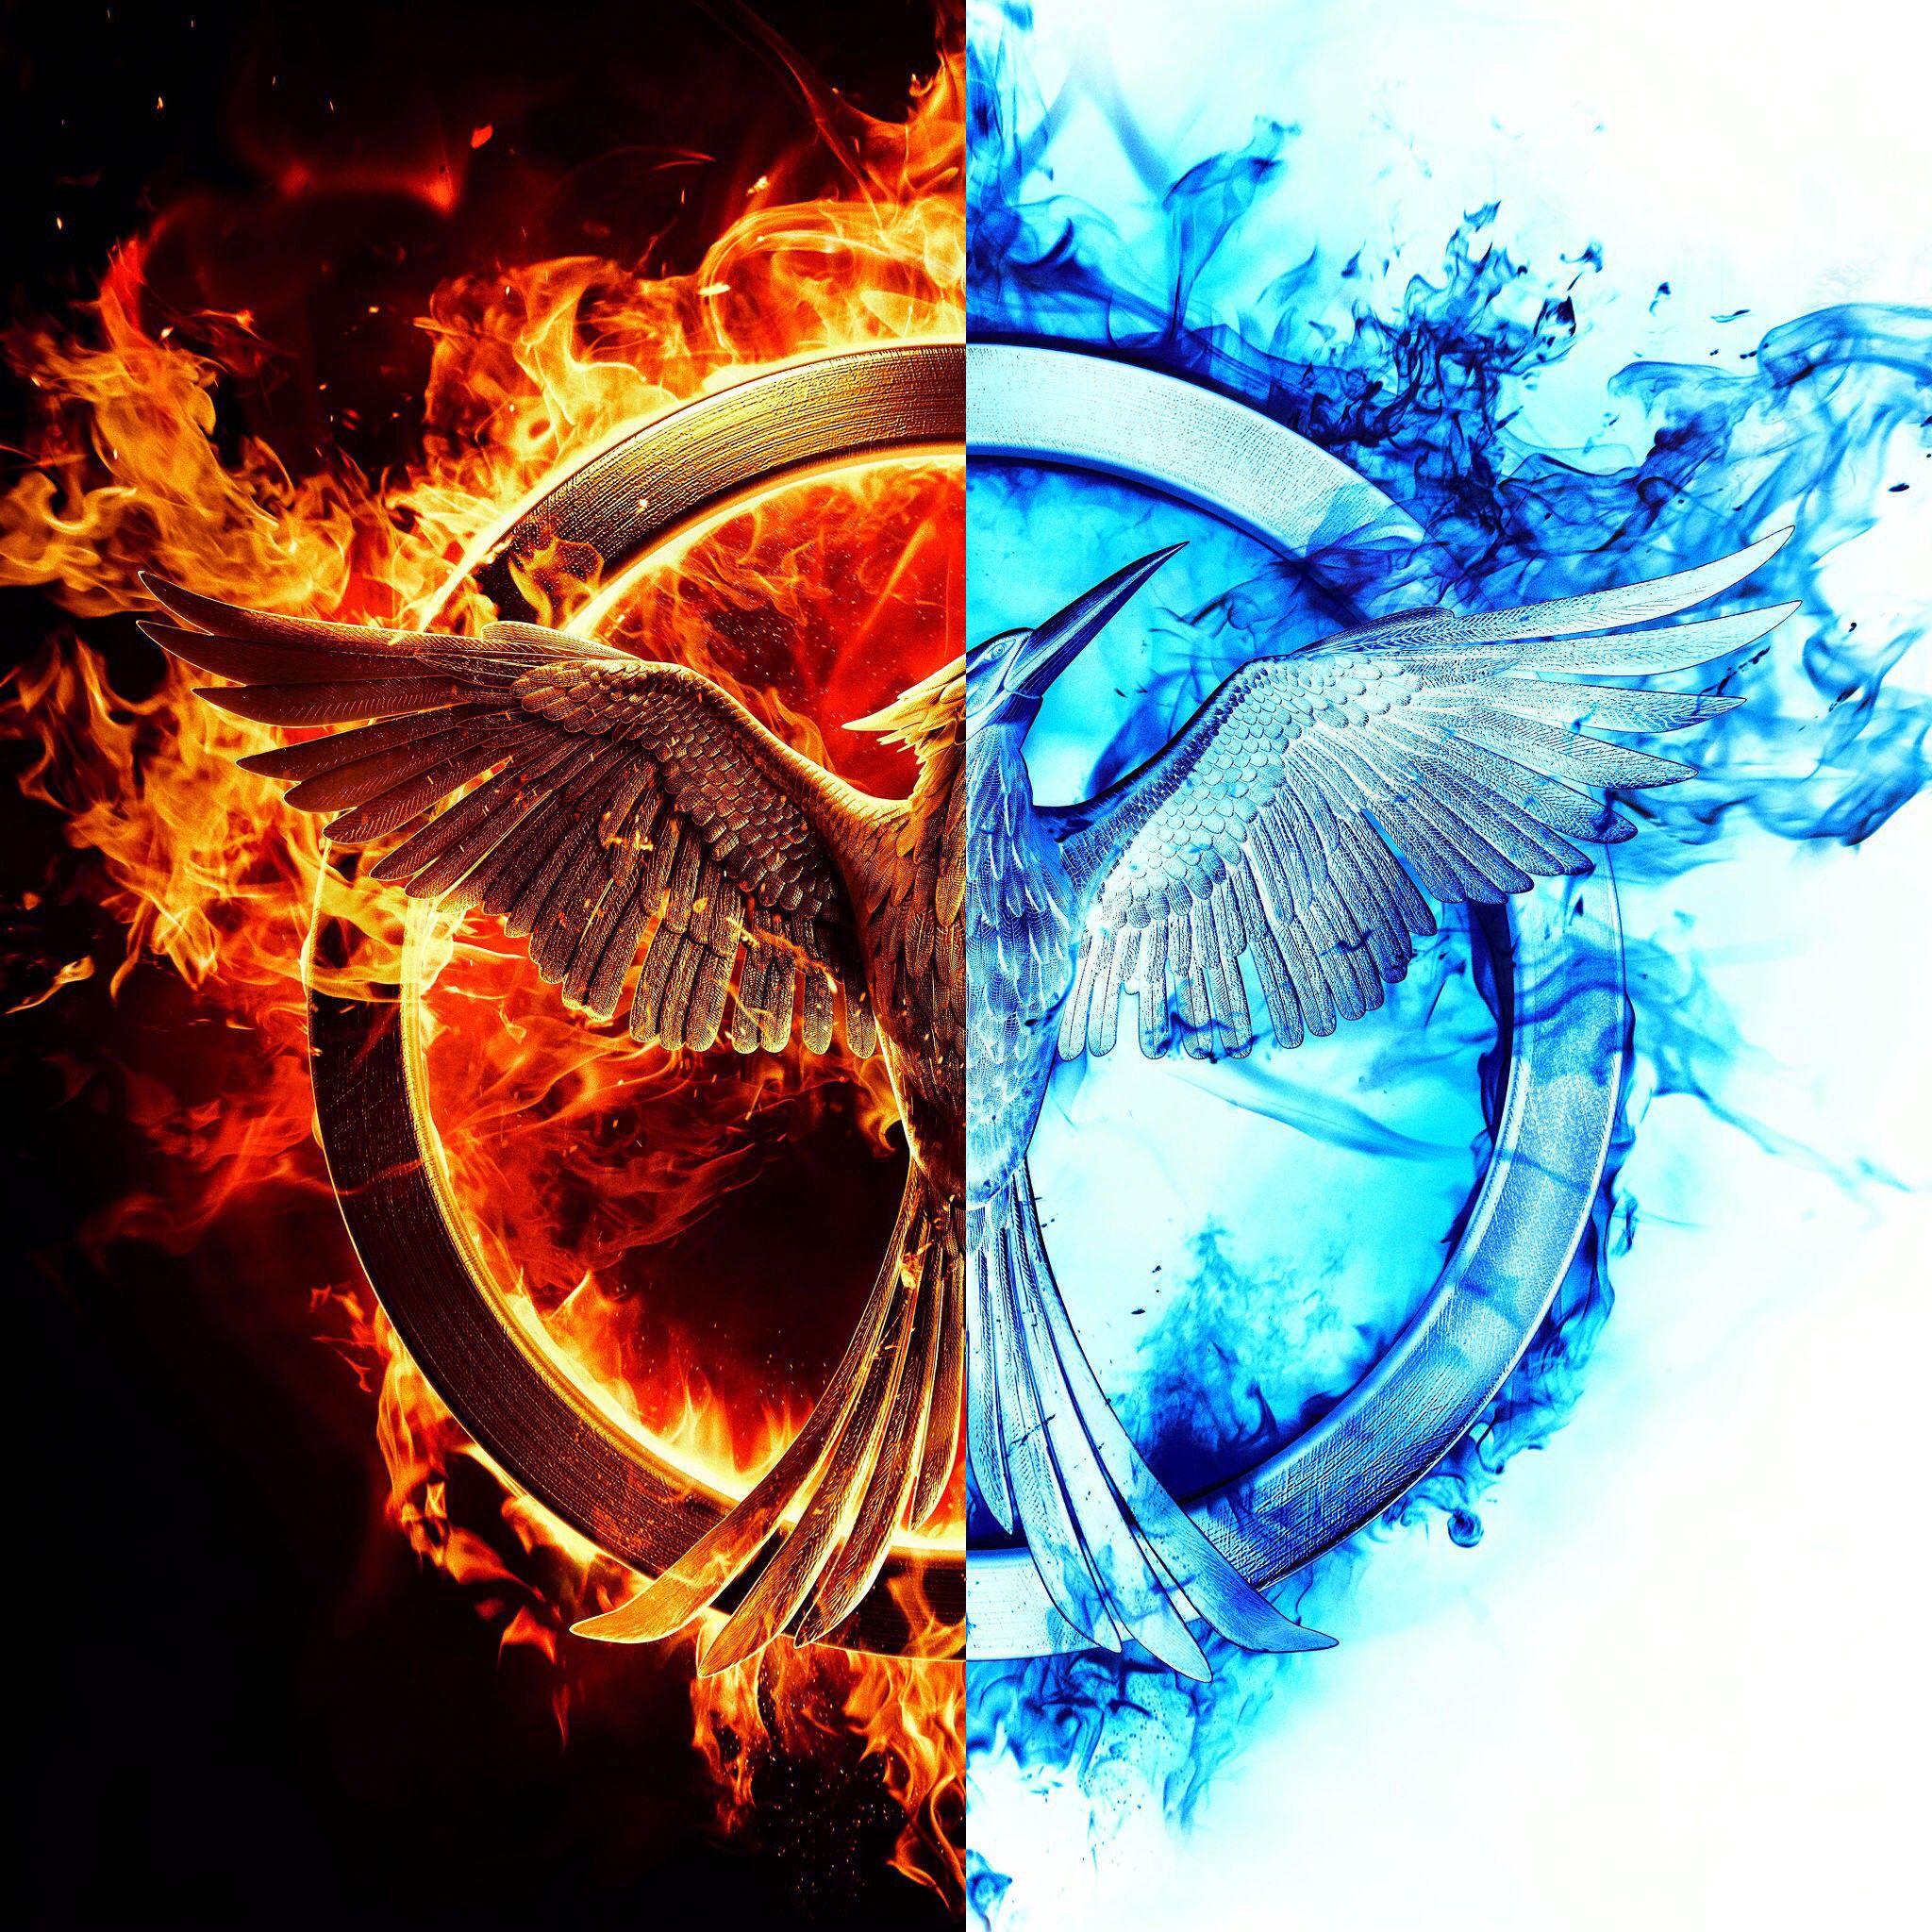 The Hunger Games: Mockingjay - Part 1 Wallpapers